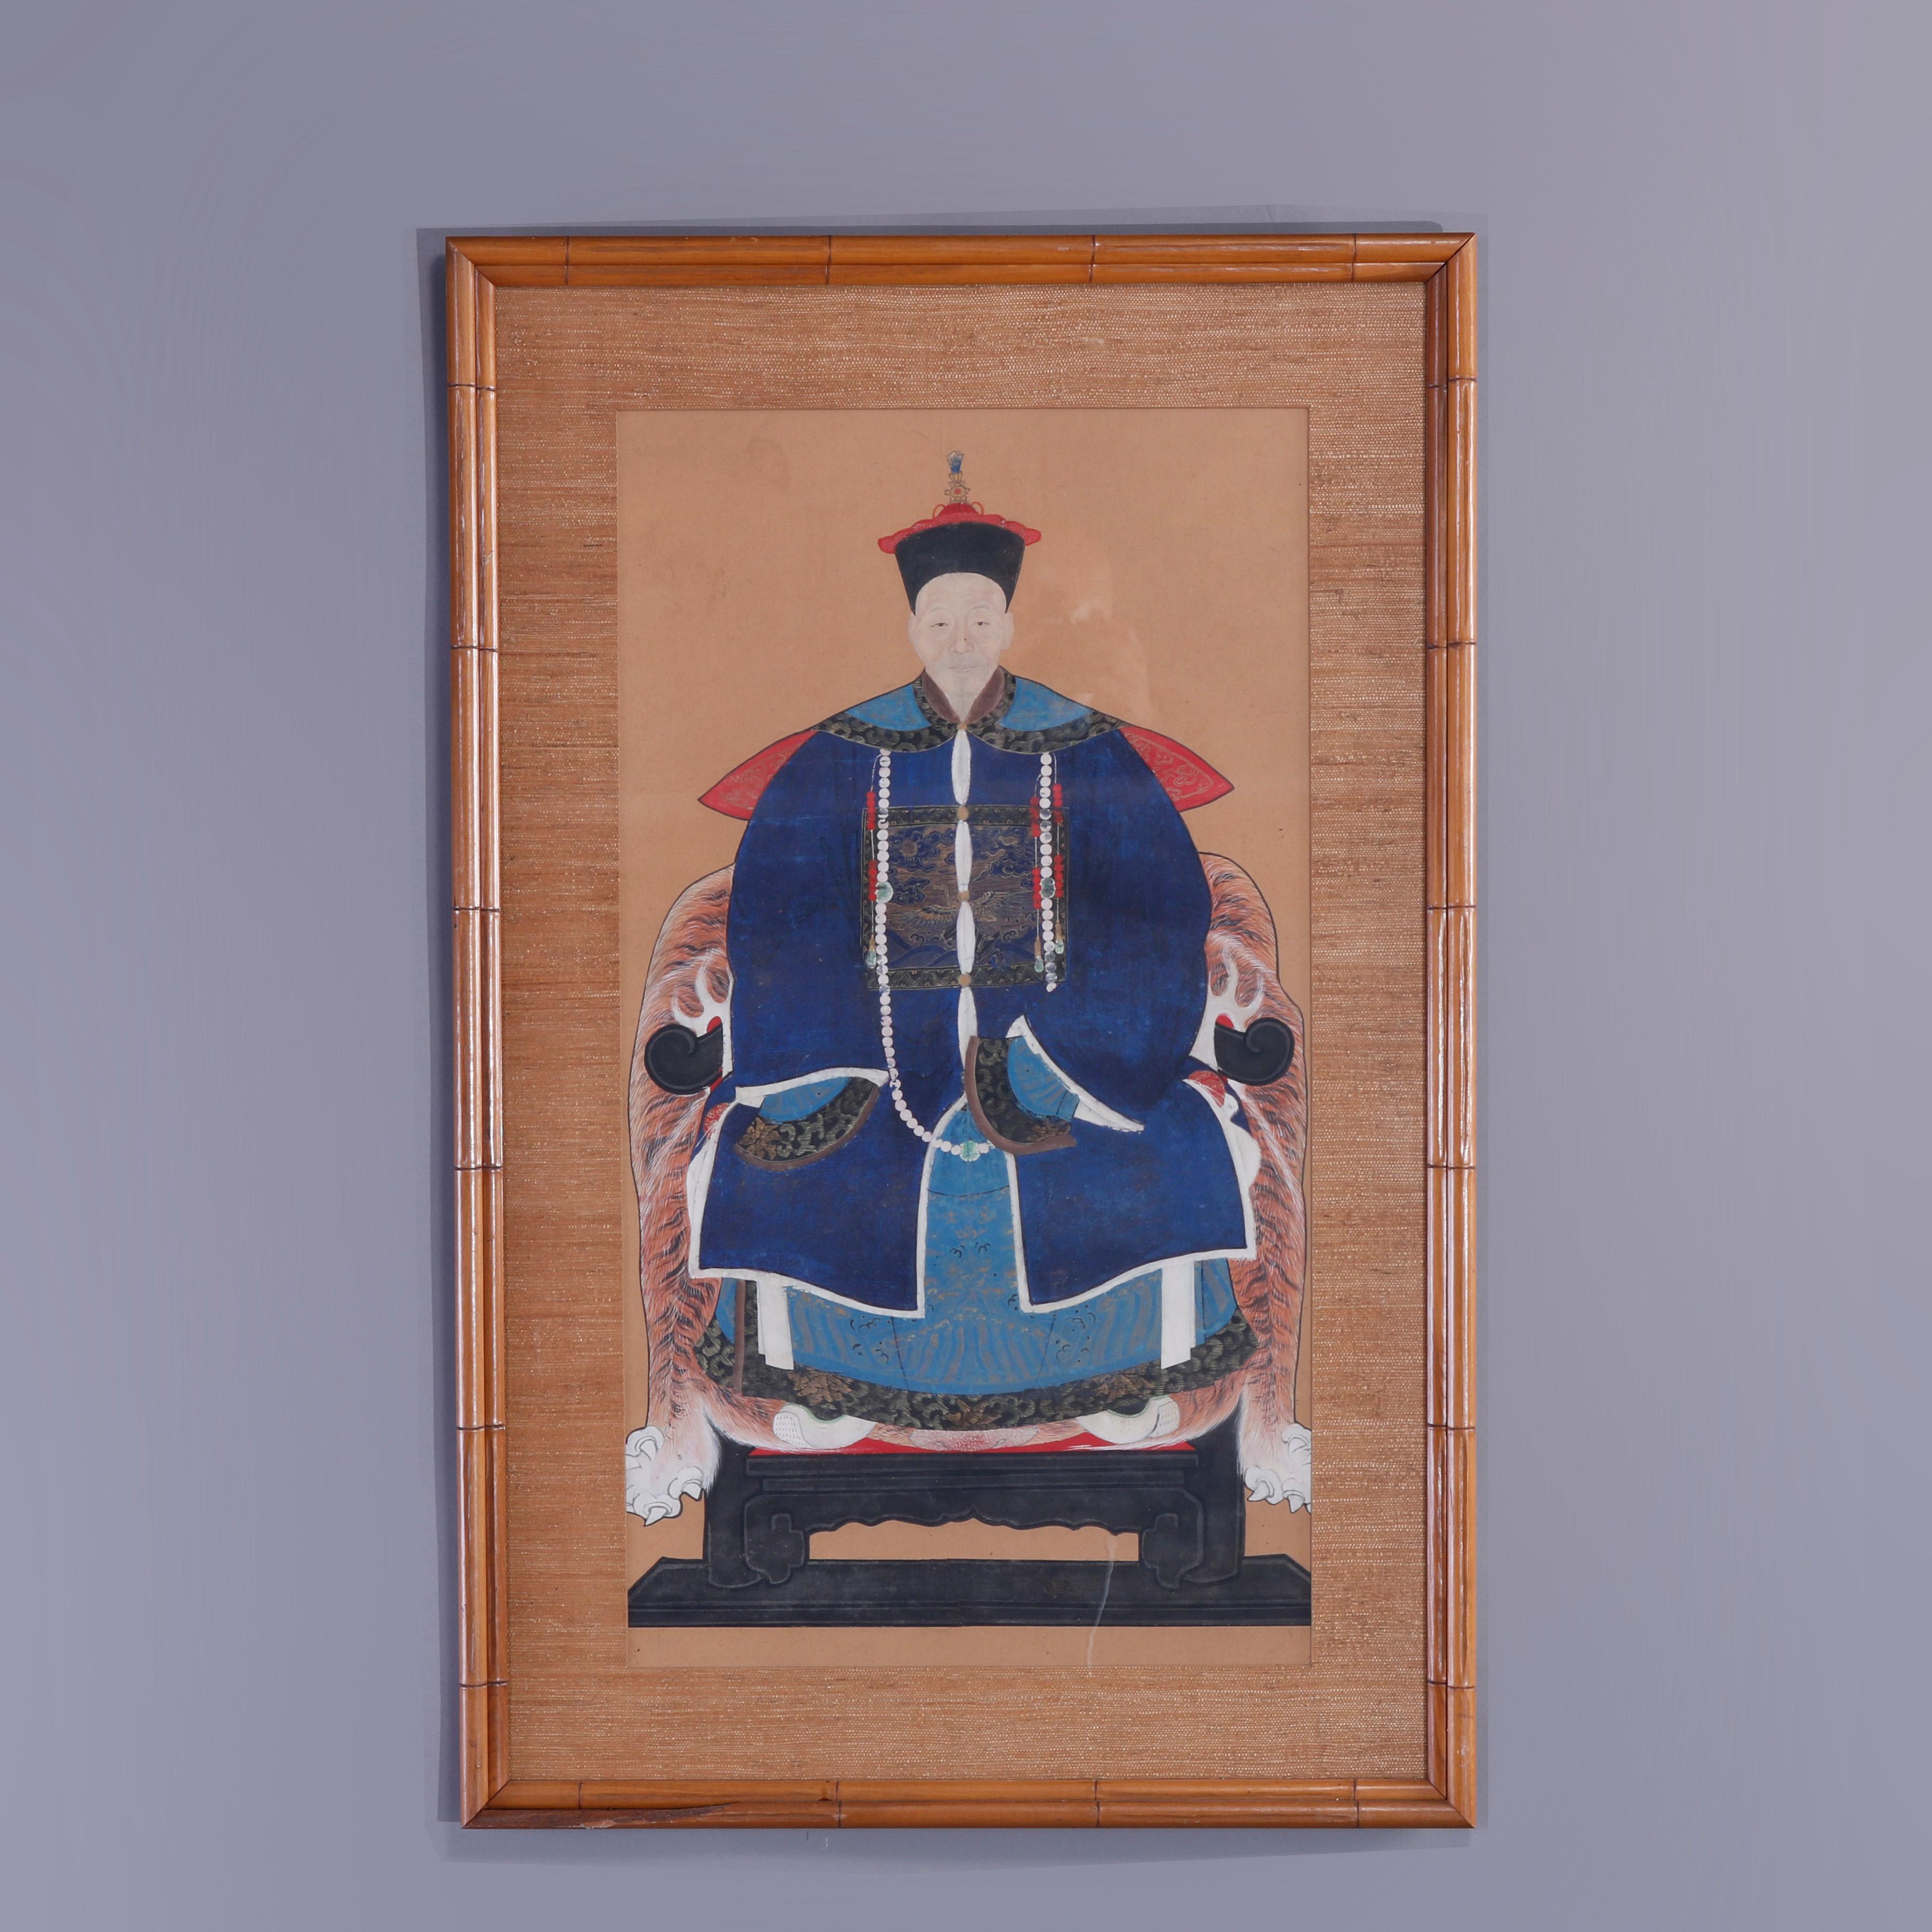 An antique Chinese Mandarin painting offers watercolor portrait of seated man, framed, c1900

Measures - 37.5'' H x 24.25'' W x 1.5'' D; sight: 31'' x 27.25''.